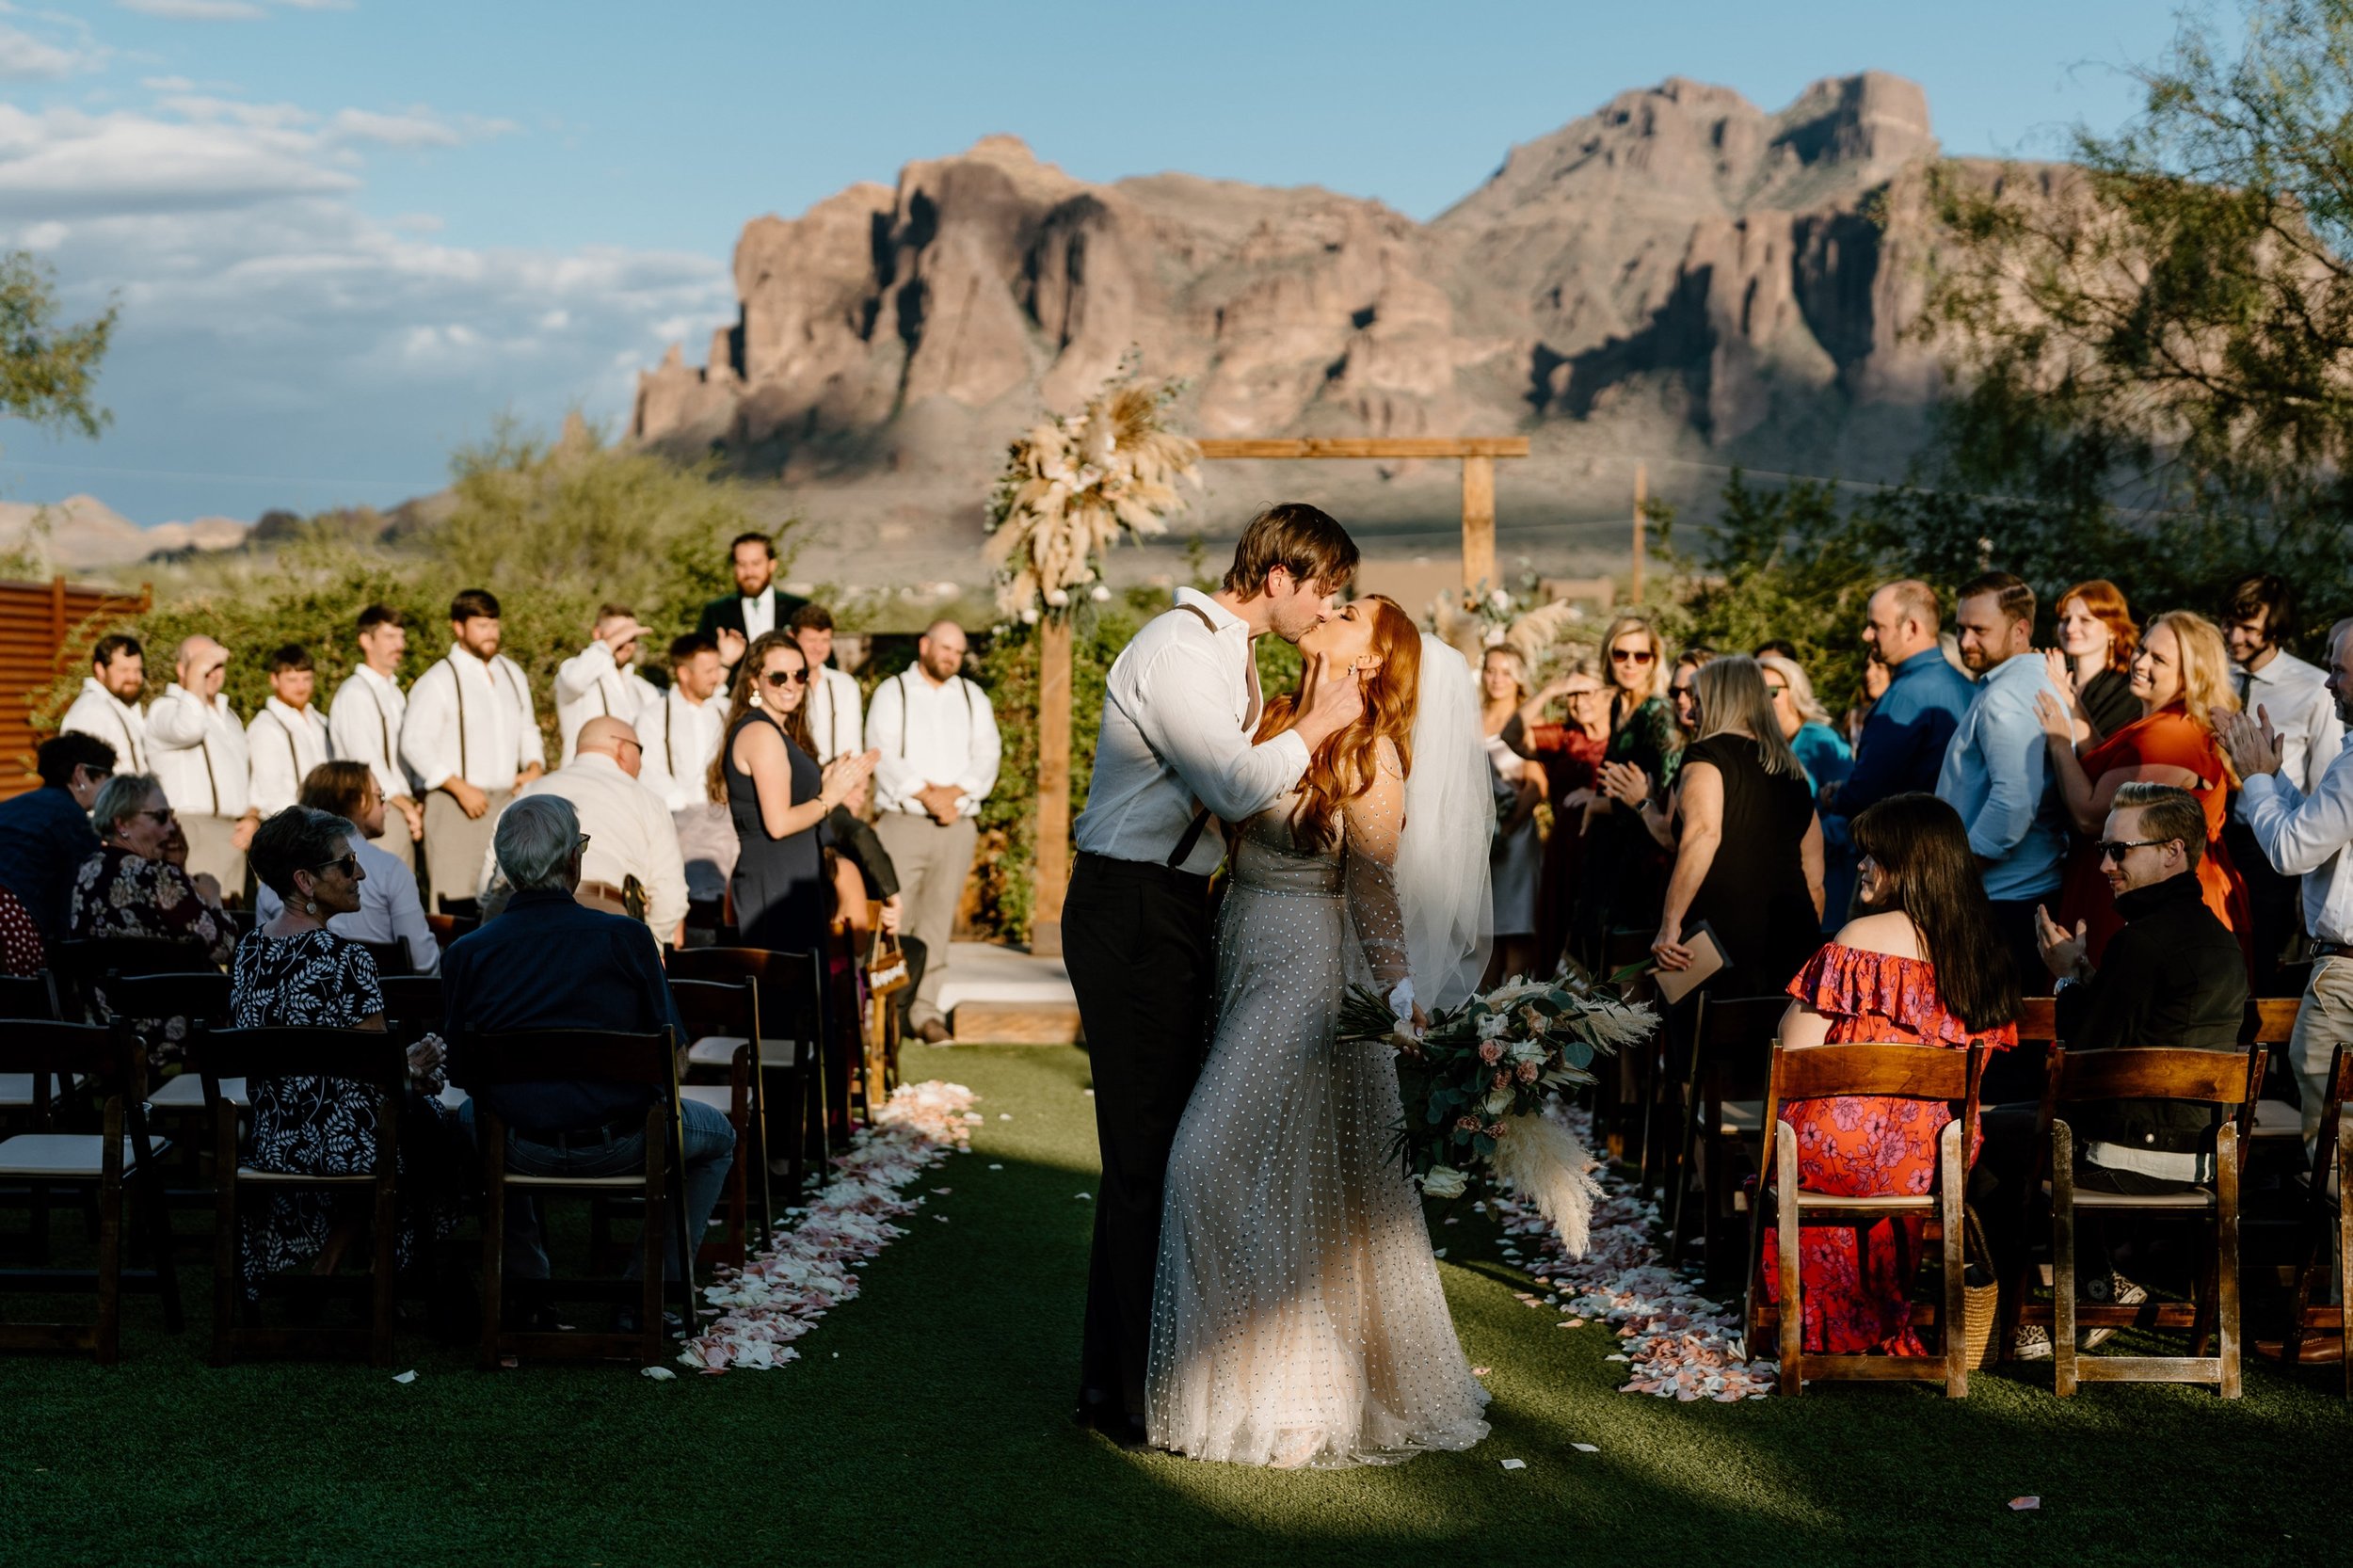 025_Wedding at The Paseo venue in Apache Junction, Arizona only 45 minutes from Phoenix..jpg